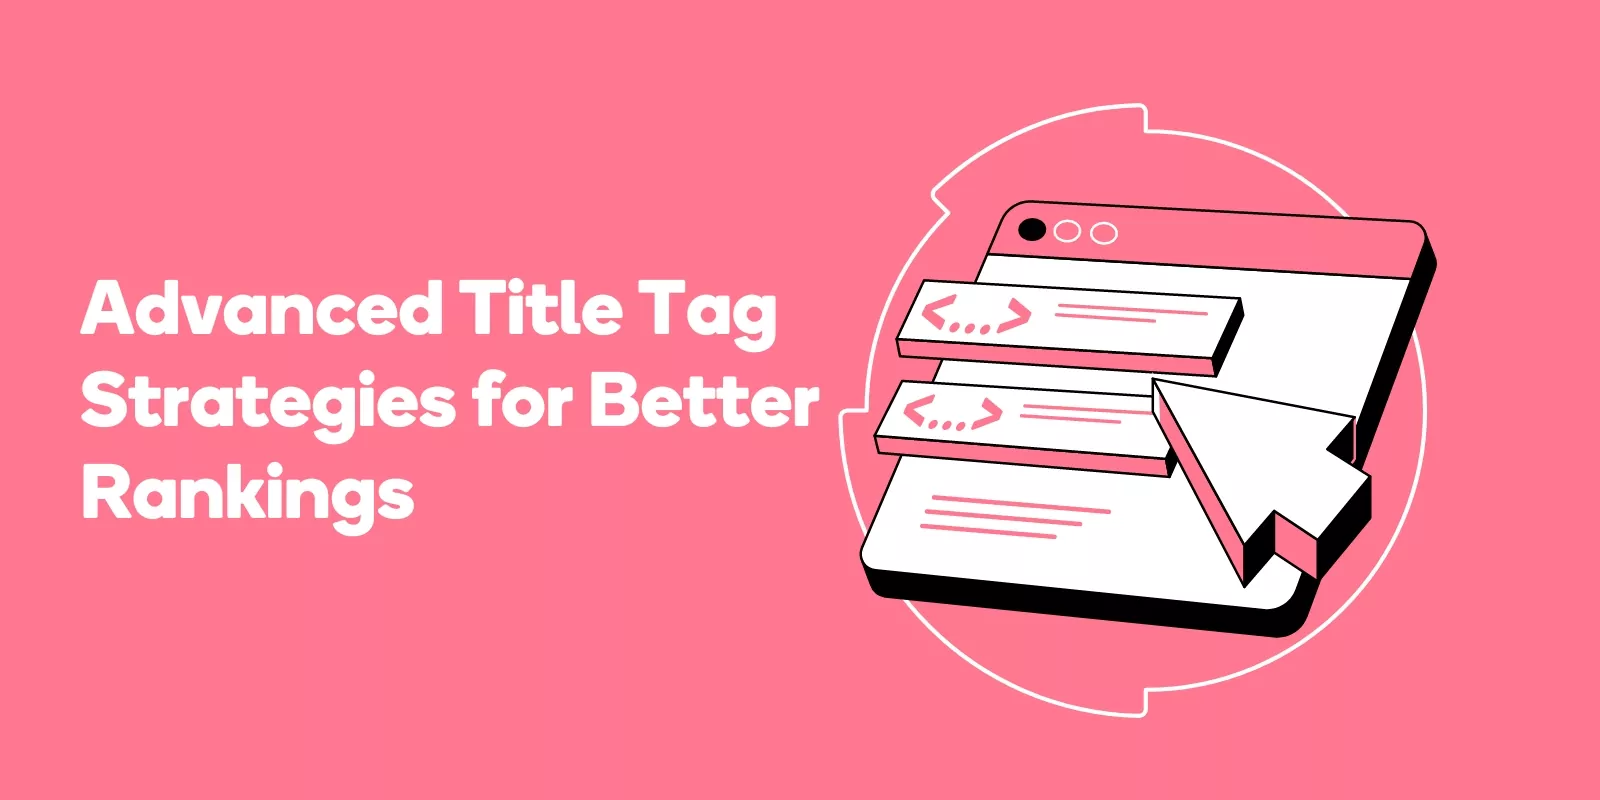 Advanced Title Tag Strategies for Better Rankings